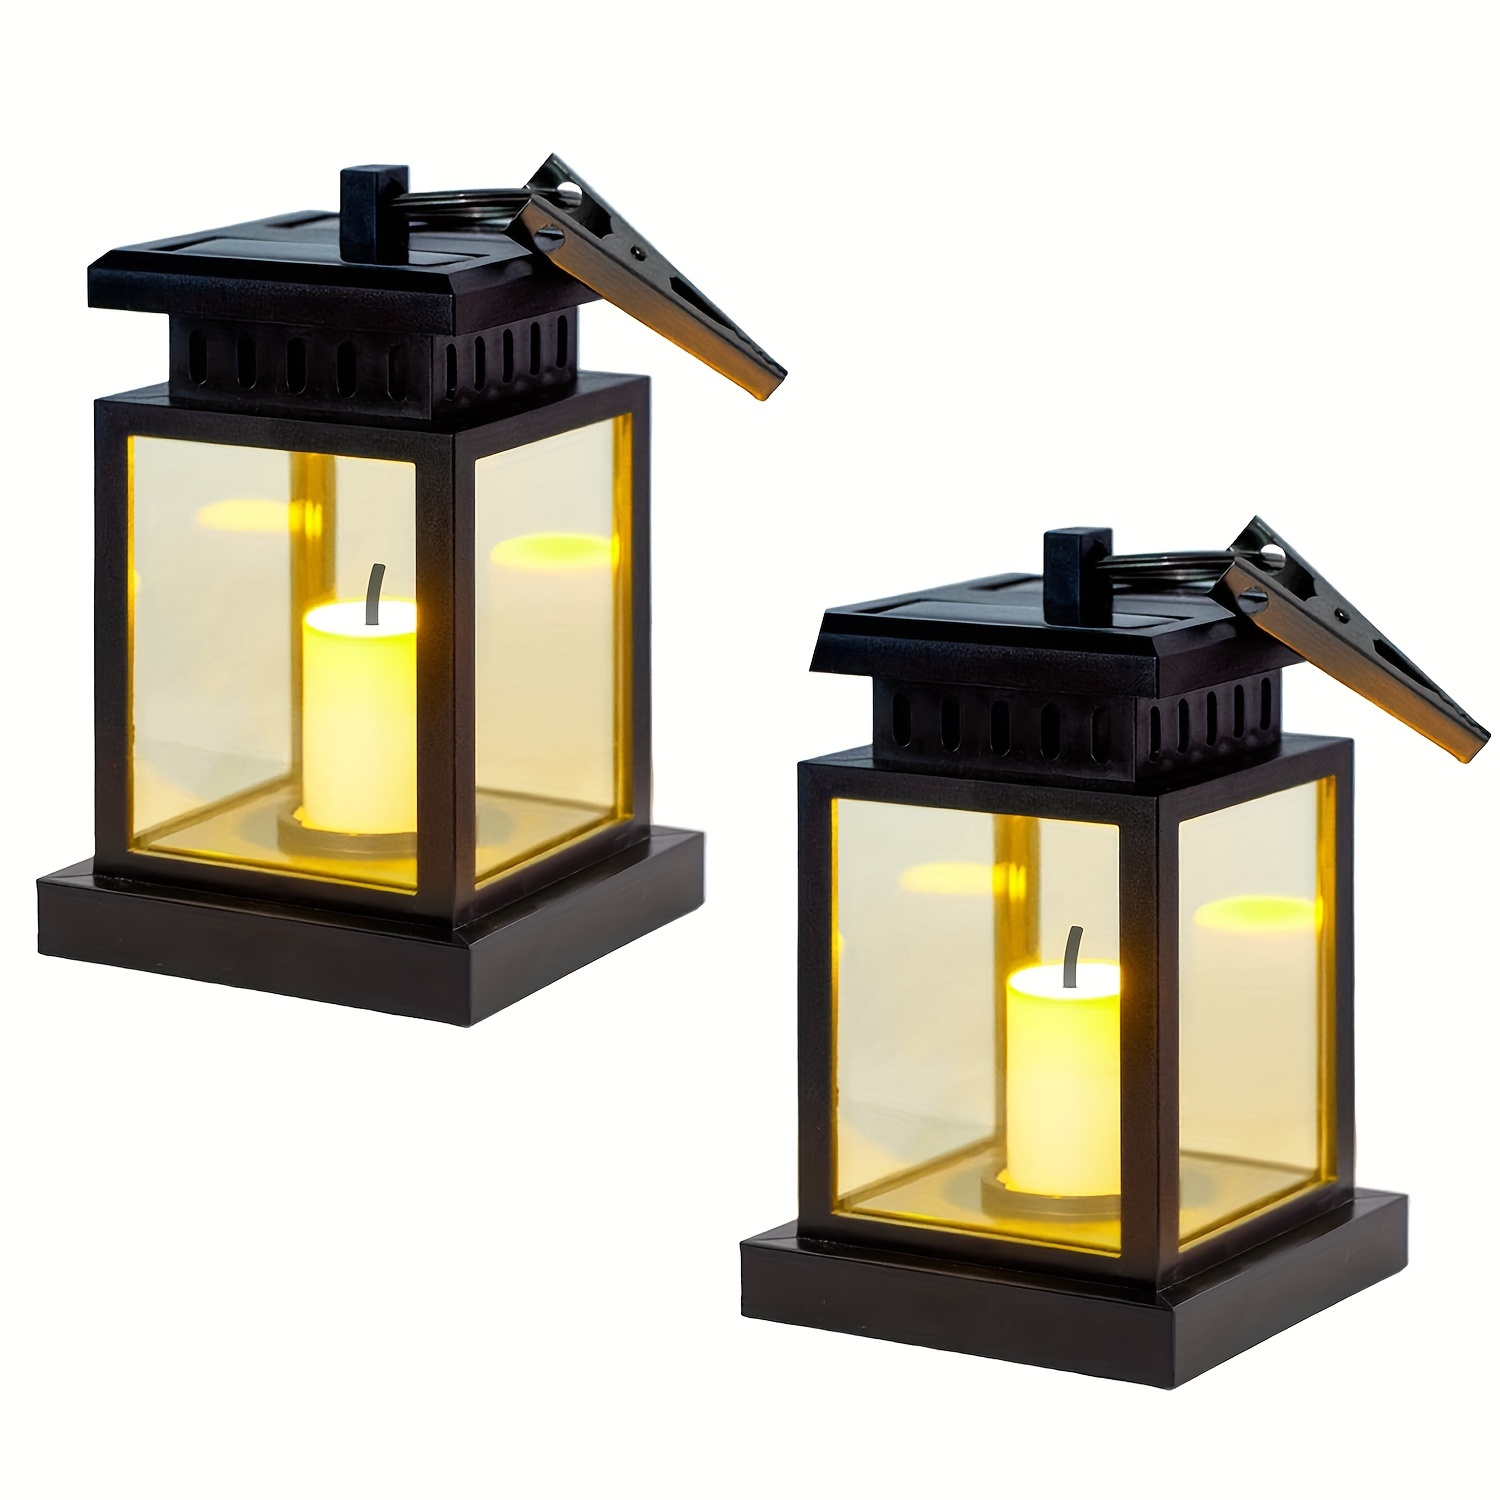 Sunklly Hanging Solar Lanterns Outdoor - 4 Pack Solar Candle Flickering  Lights Waterproof Led Hanging Solar Lanterns Lights for Garden, Patio